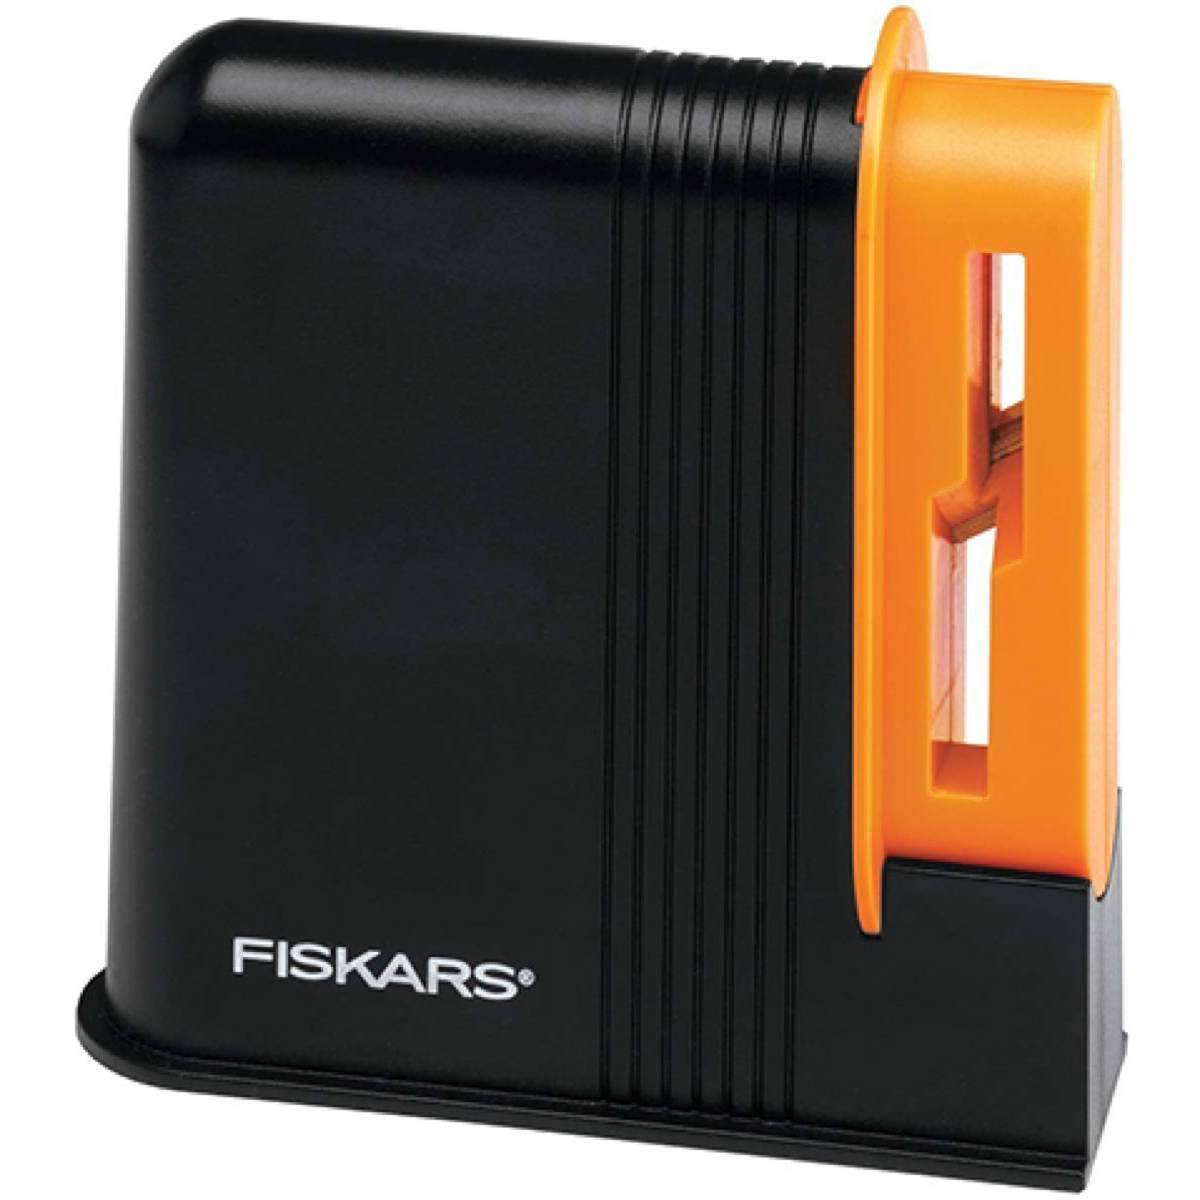 A black and orange tool has the word Fiskars on the side.